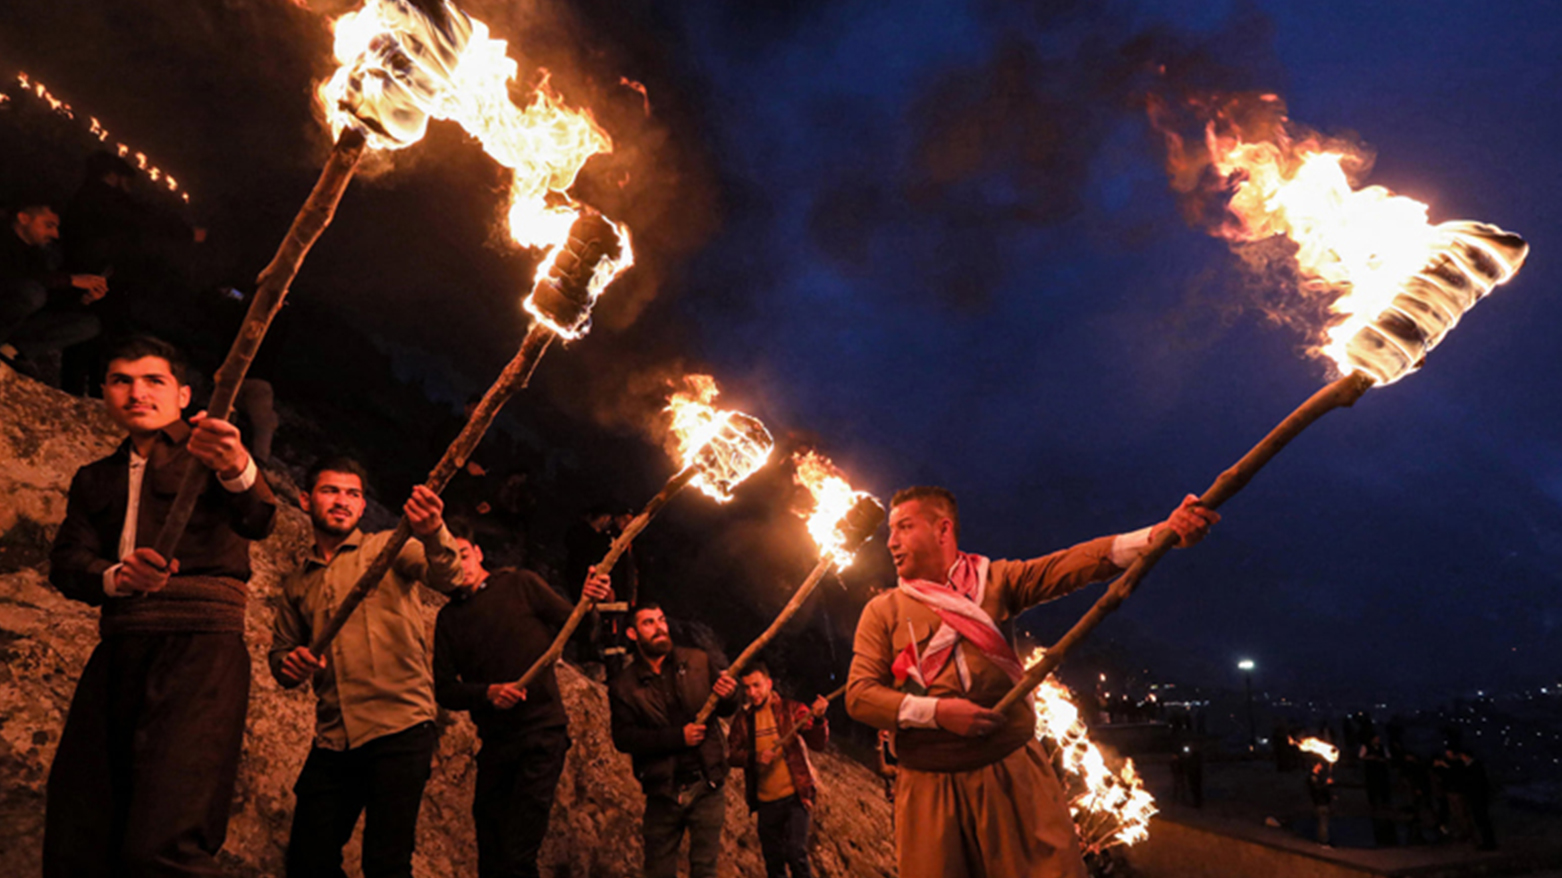 A number of men hold lit torches as they climb on a mountain in the Kurdistan Region Akre town on the eve of Kurdish New Year Newroz, March 20, 2022. (Photo: Safin Hamed/AFP)